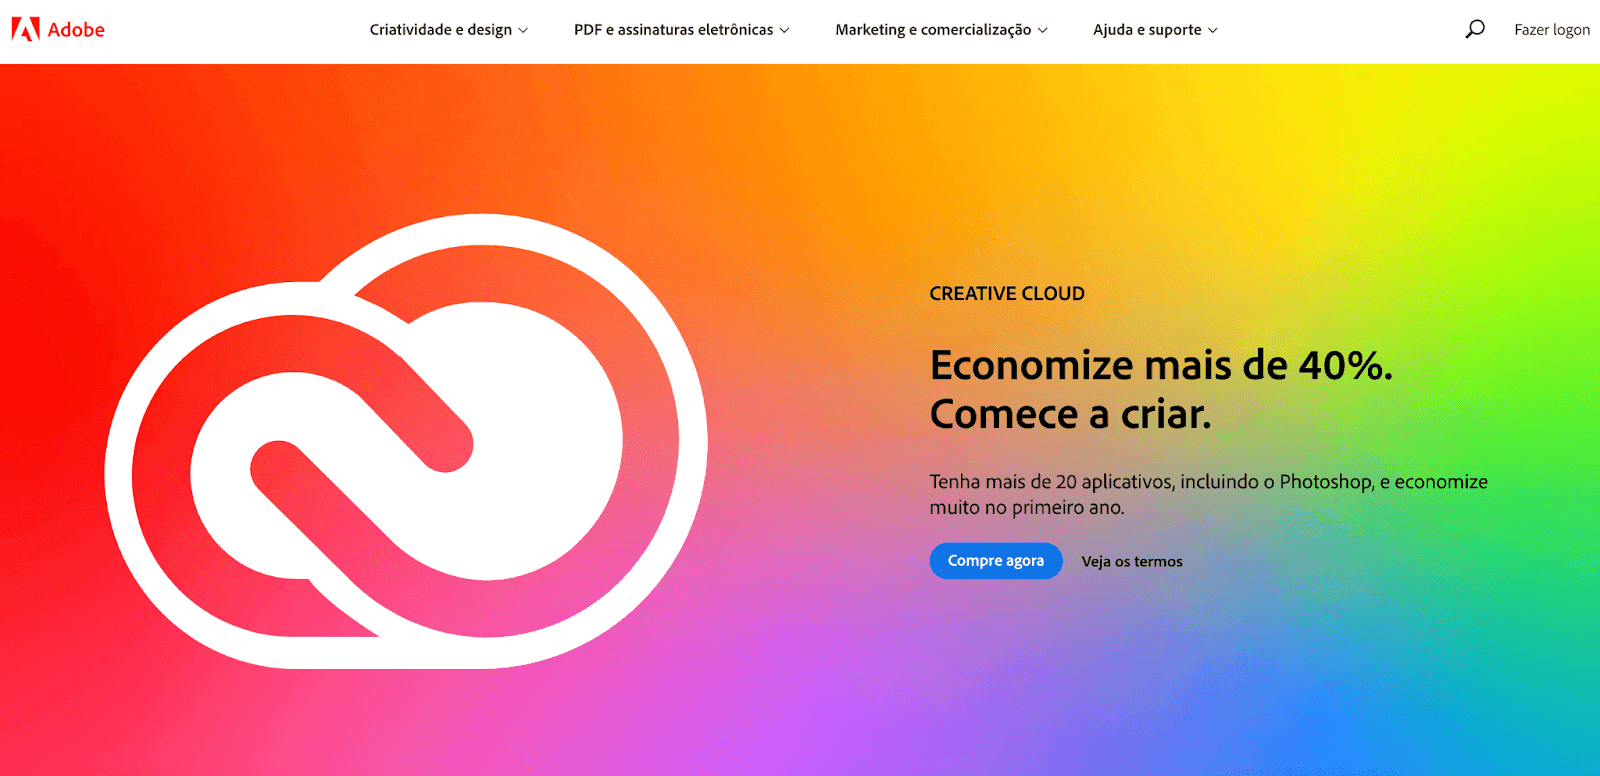 The Adobe homepage of their website but in French